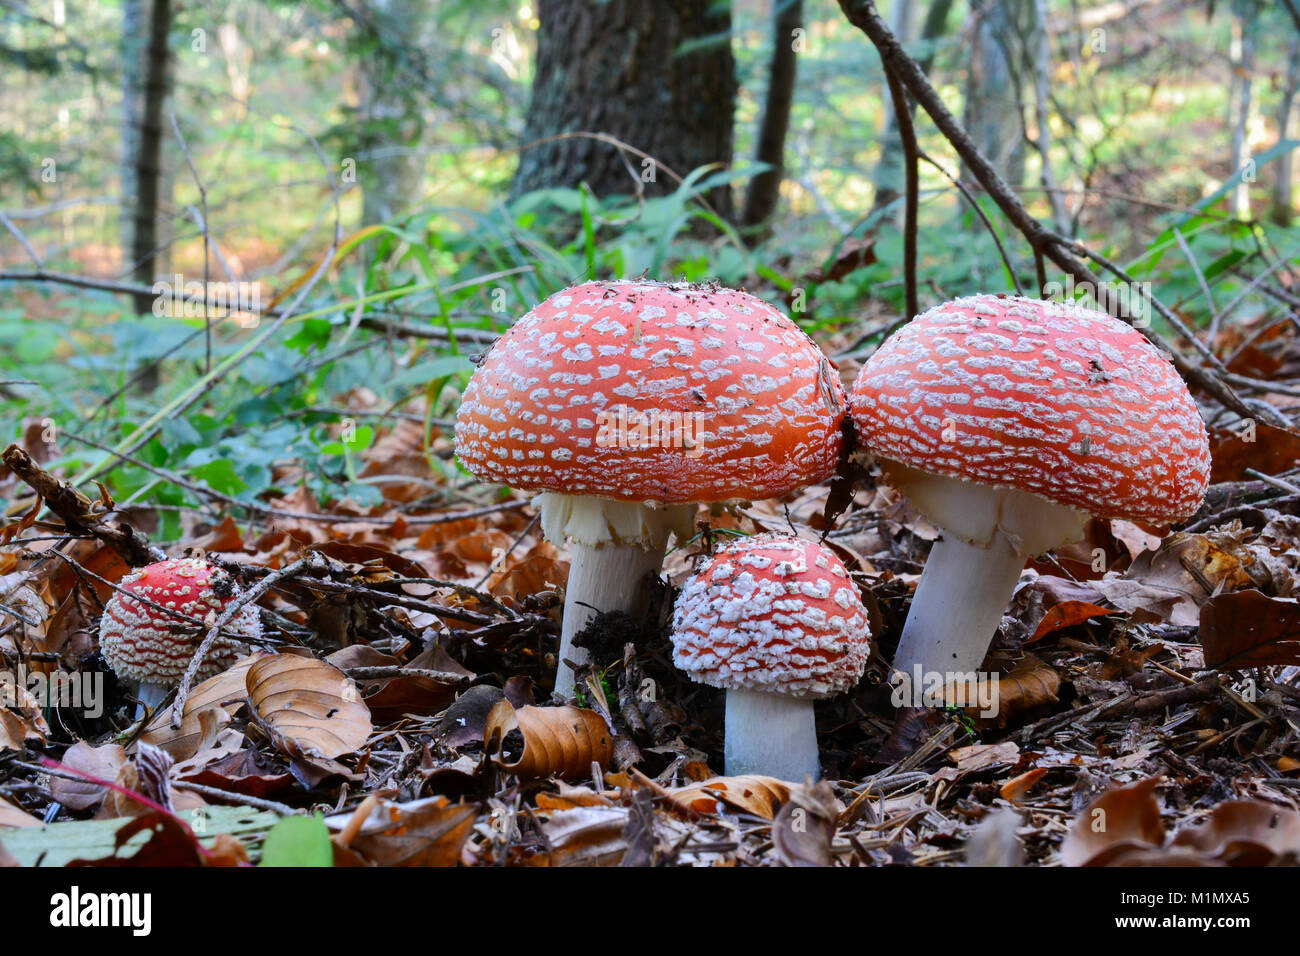 Group of young, beautiful but very toxic Amanita muscaria or Fly Agaric mushrooms in mixed mountain forest Stock Photo